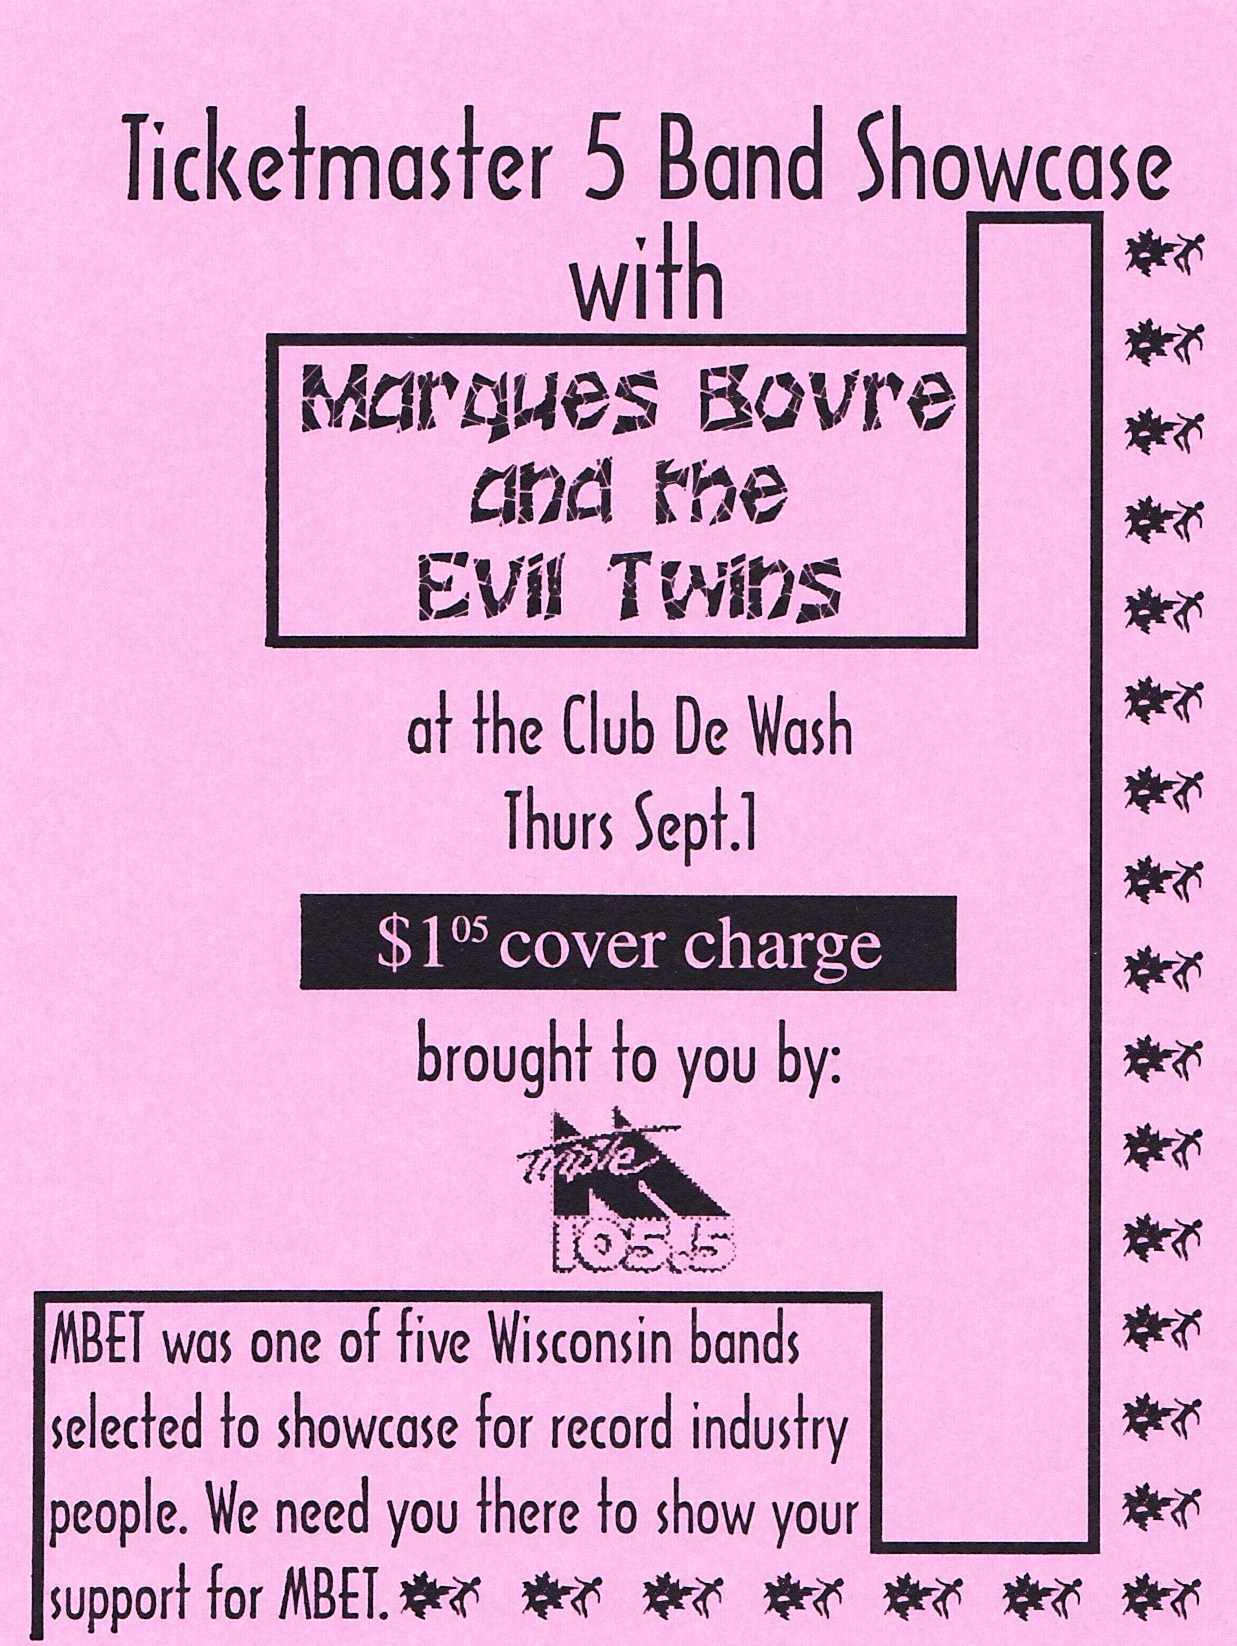 Marques Bovre and the Evil Twins, September 1, 1994